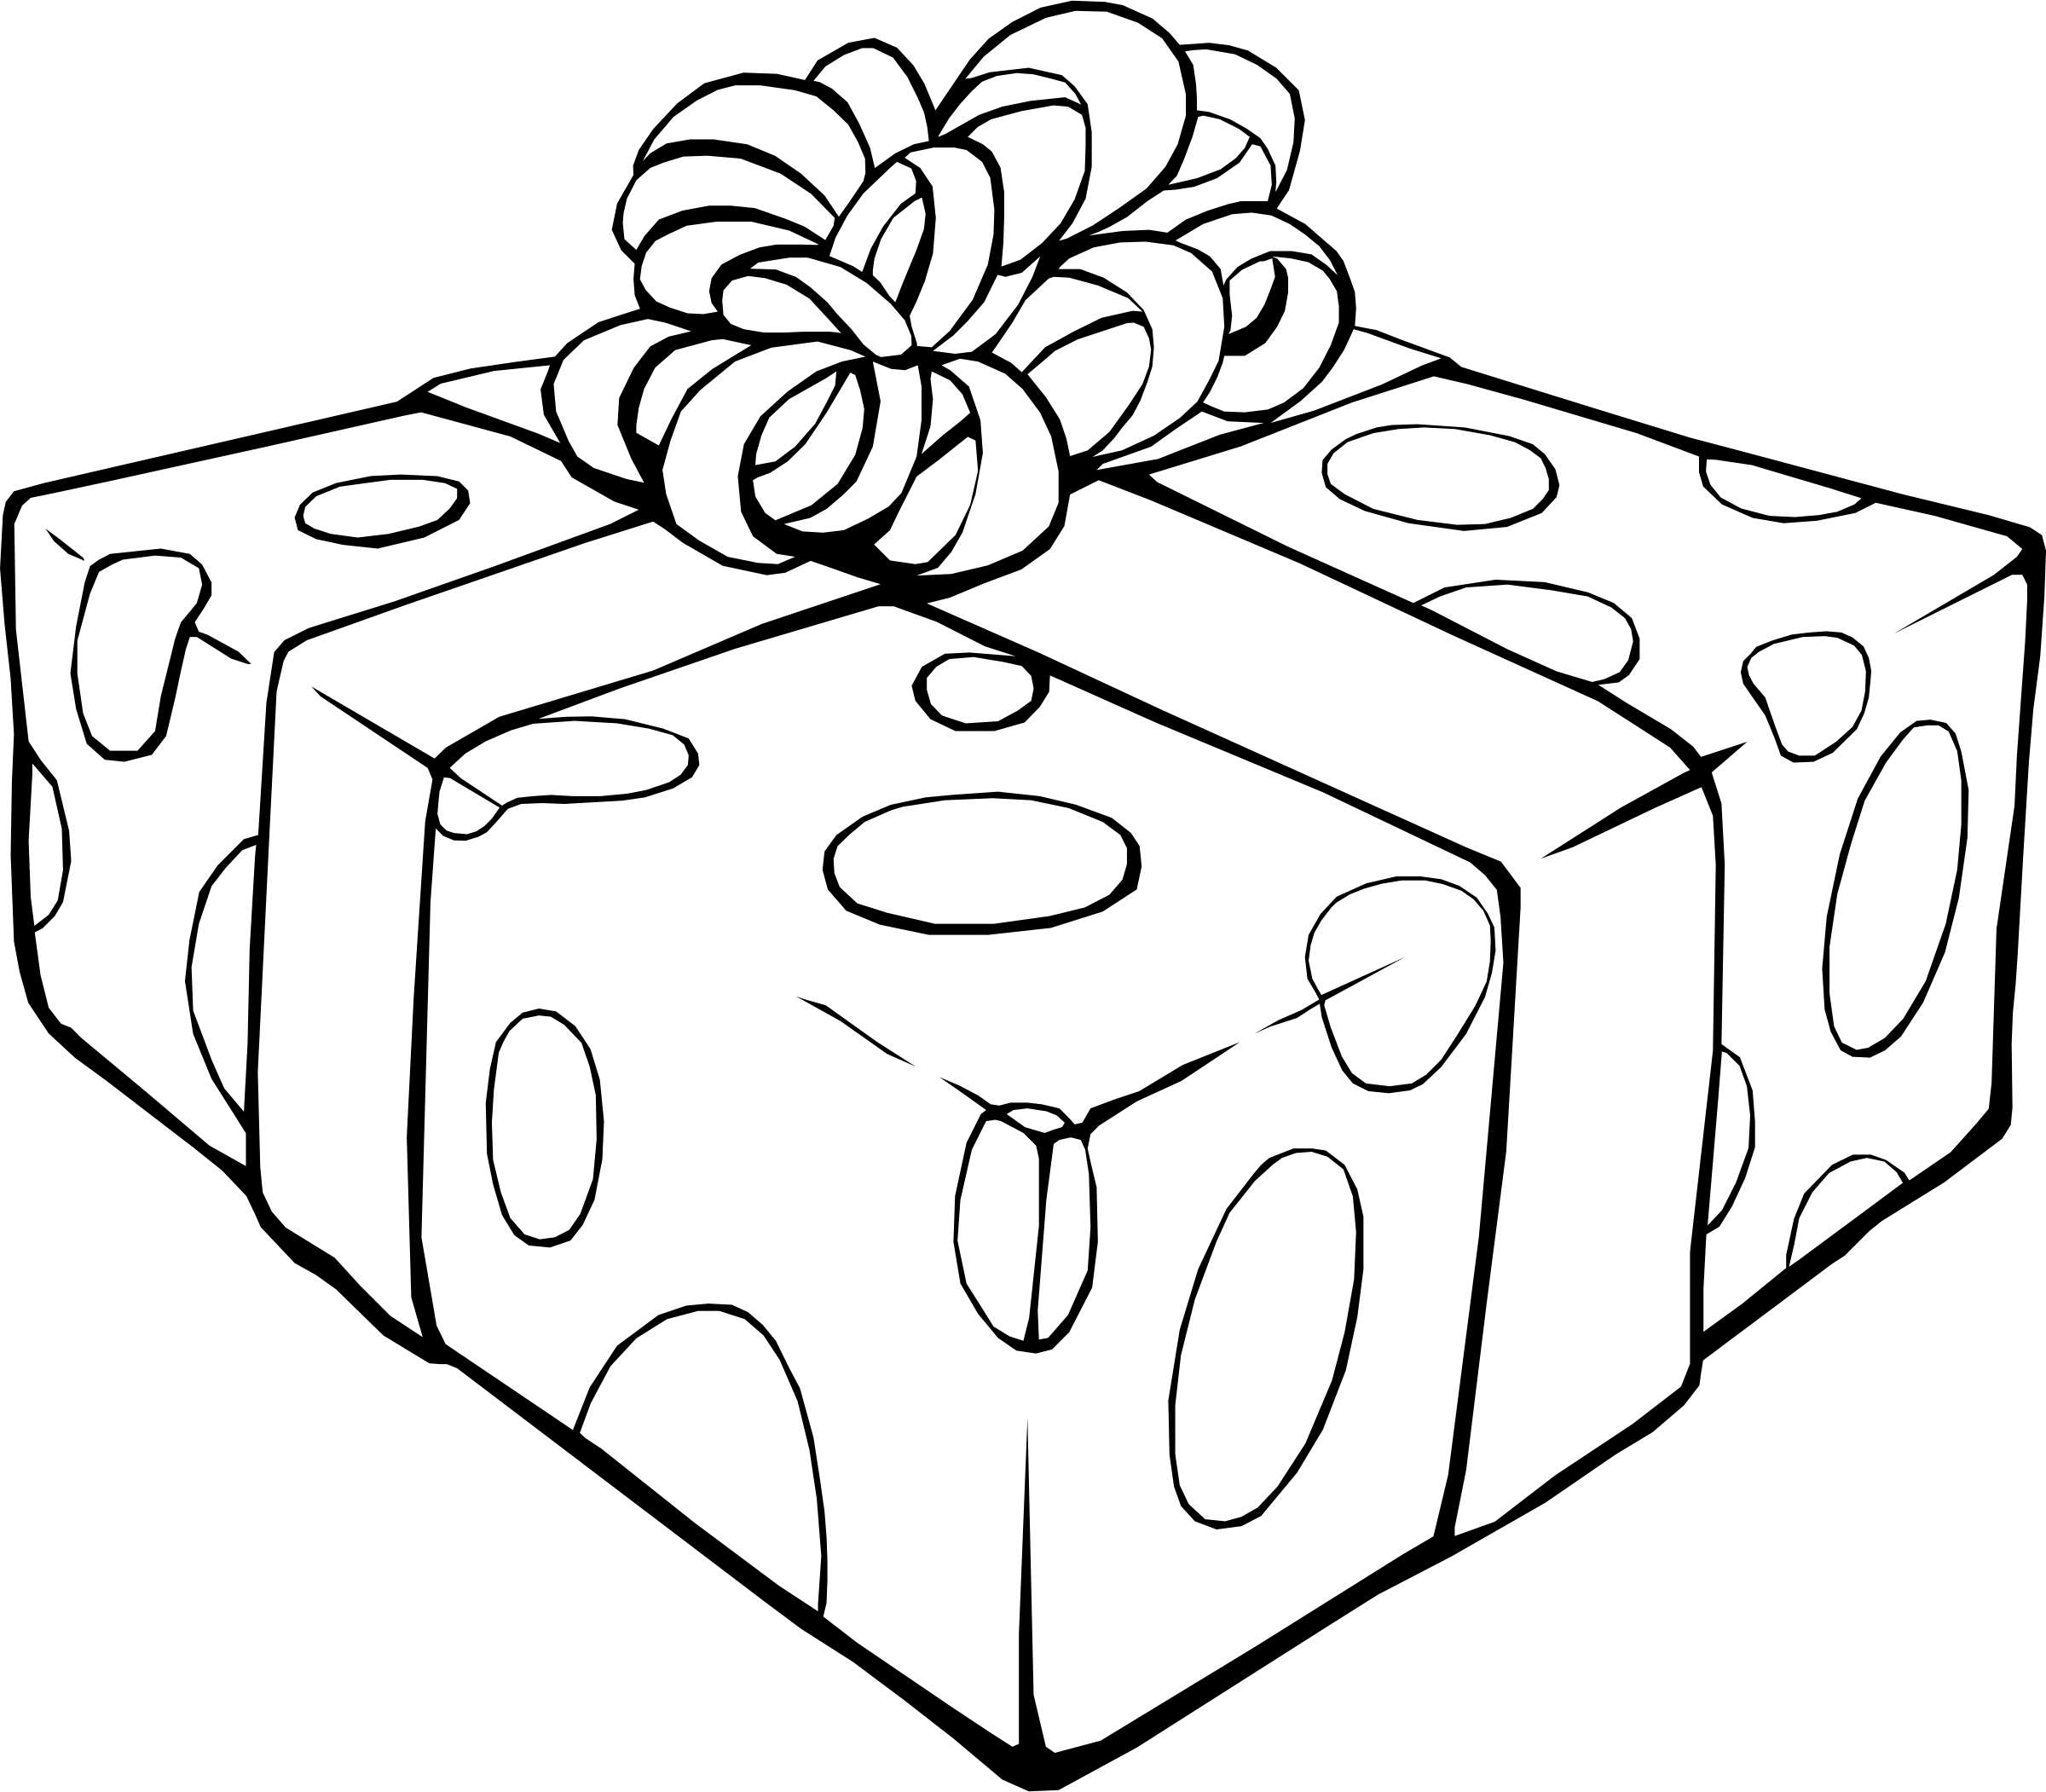 Birthday present drawing at. Outline clipart gift